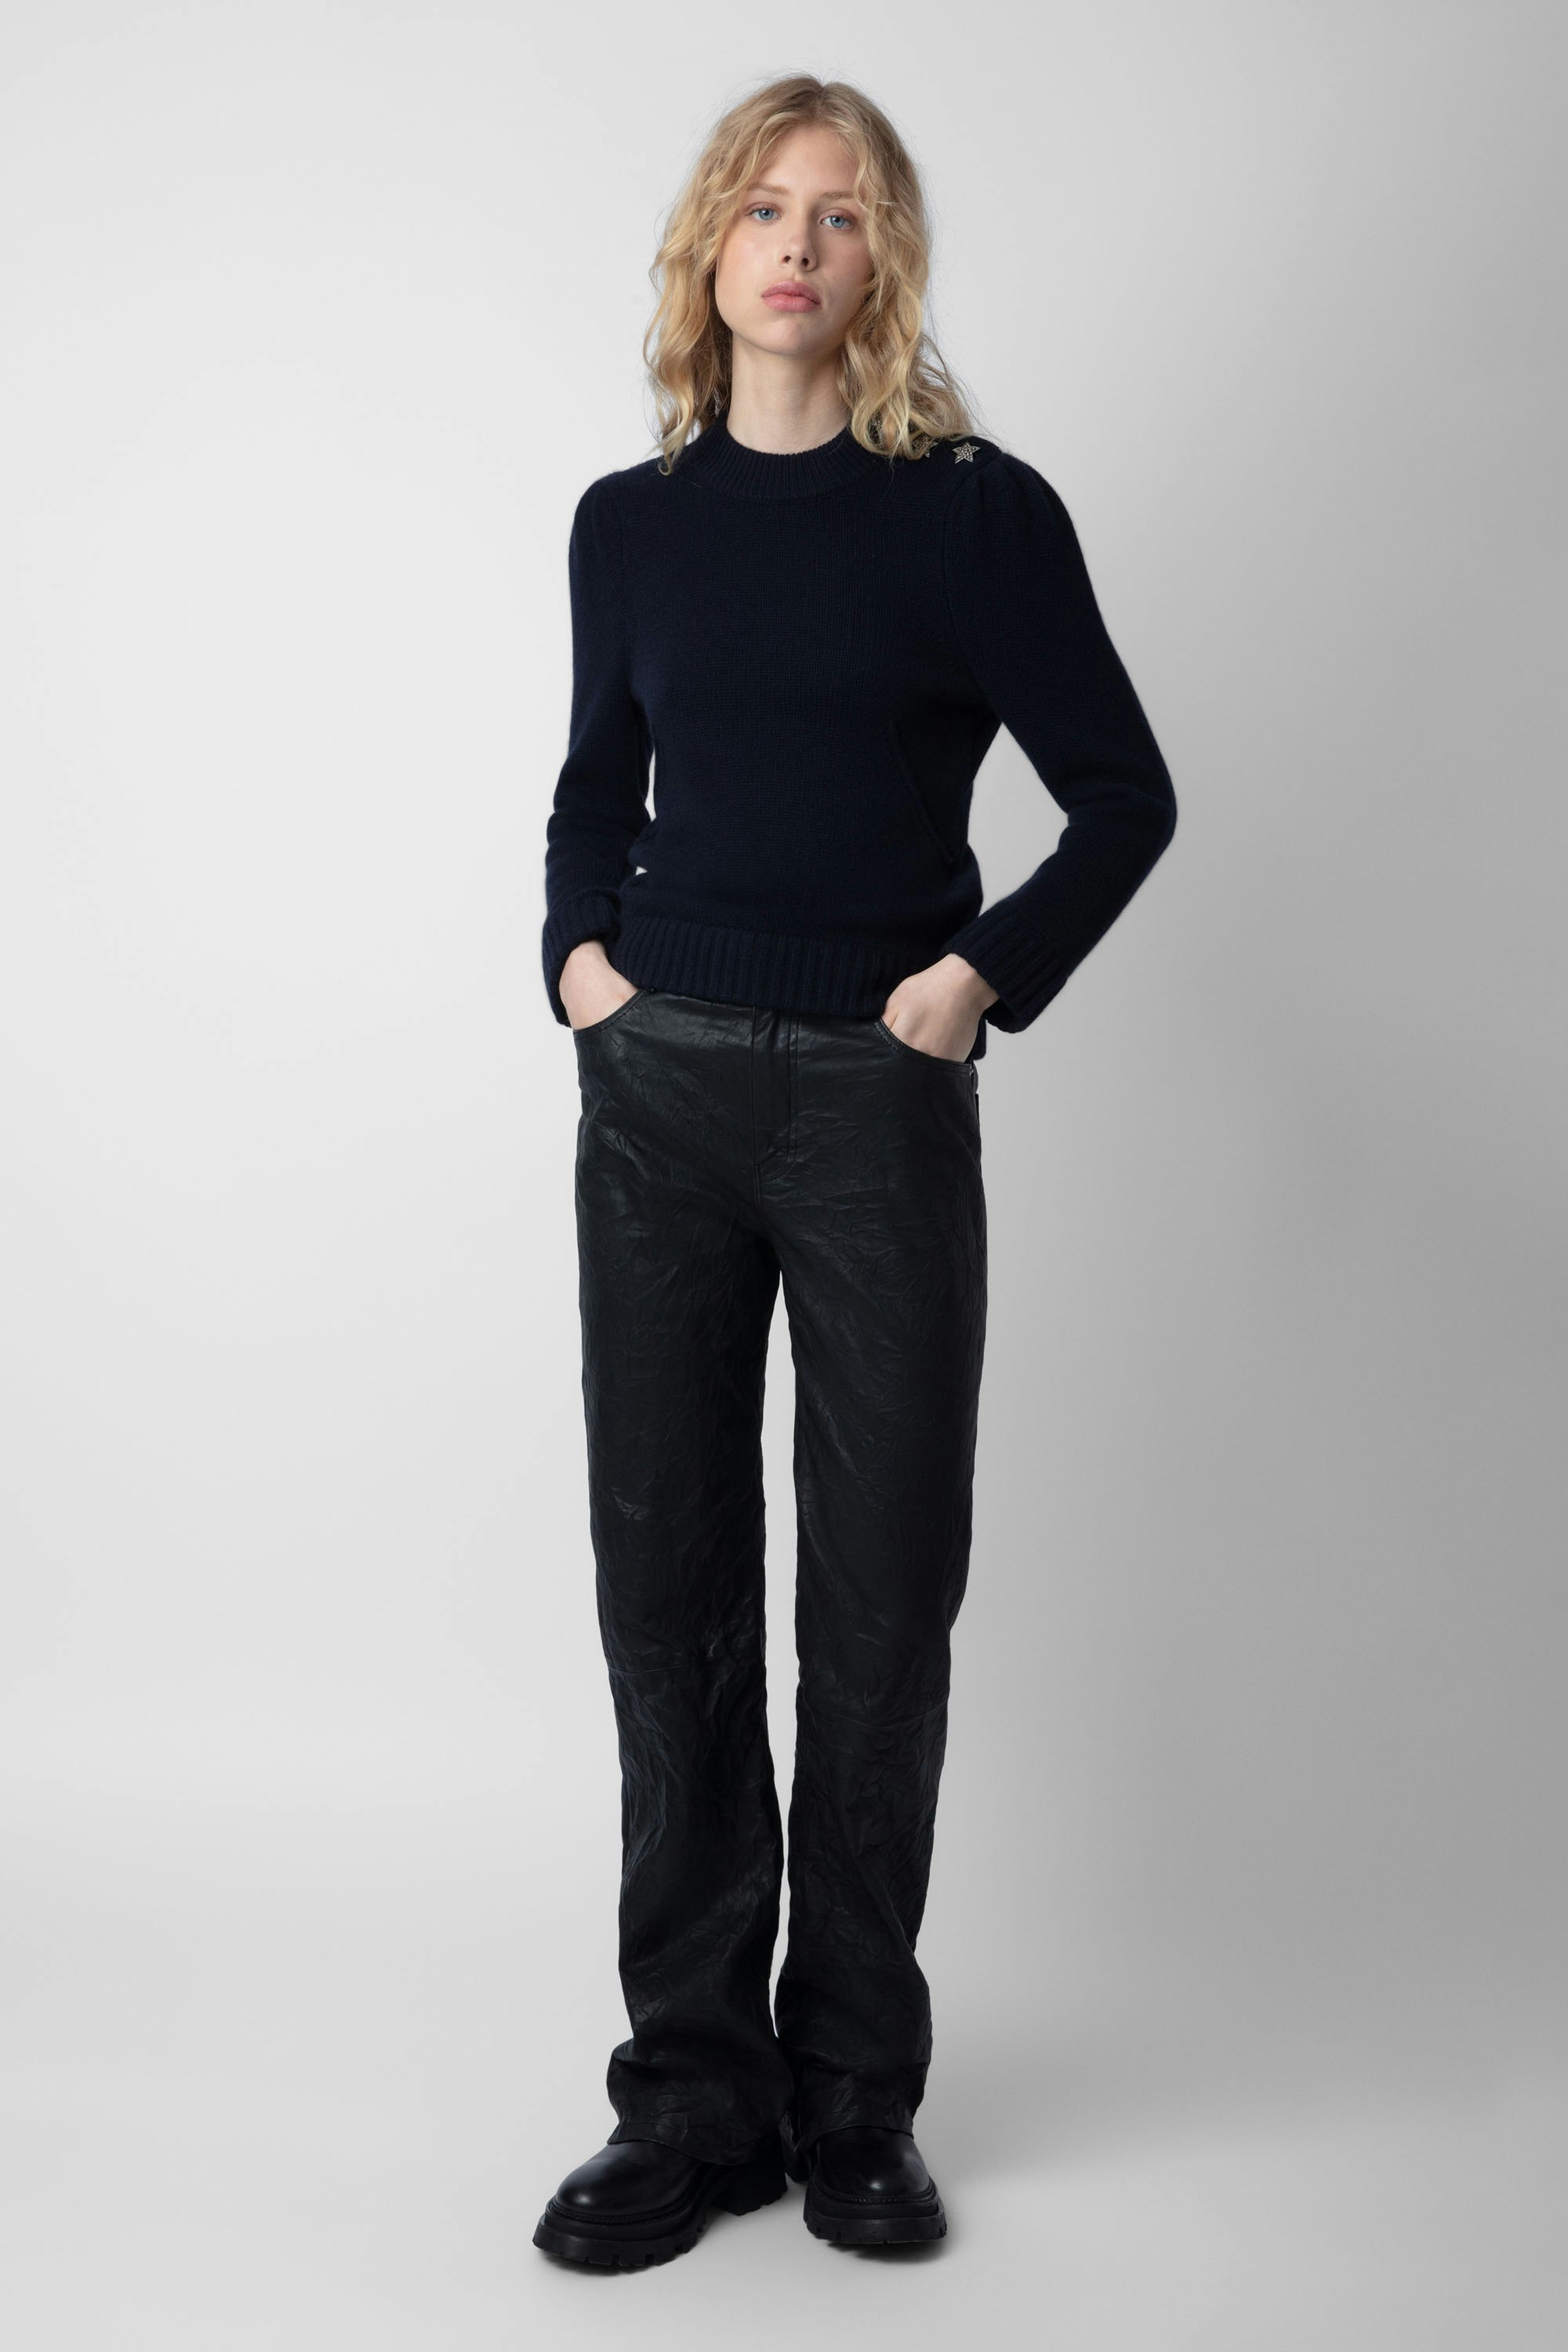 Betson Jewelled Cashmere Jumper - Women's navy blue cashmere sweater with star-shaped jewelled buttons on the shoulders.